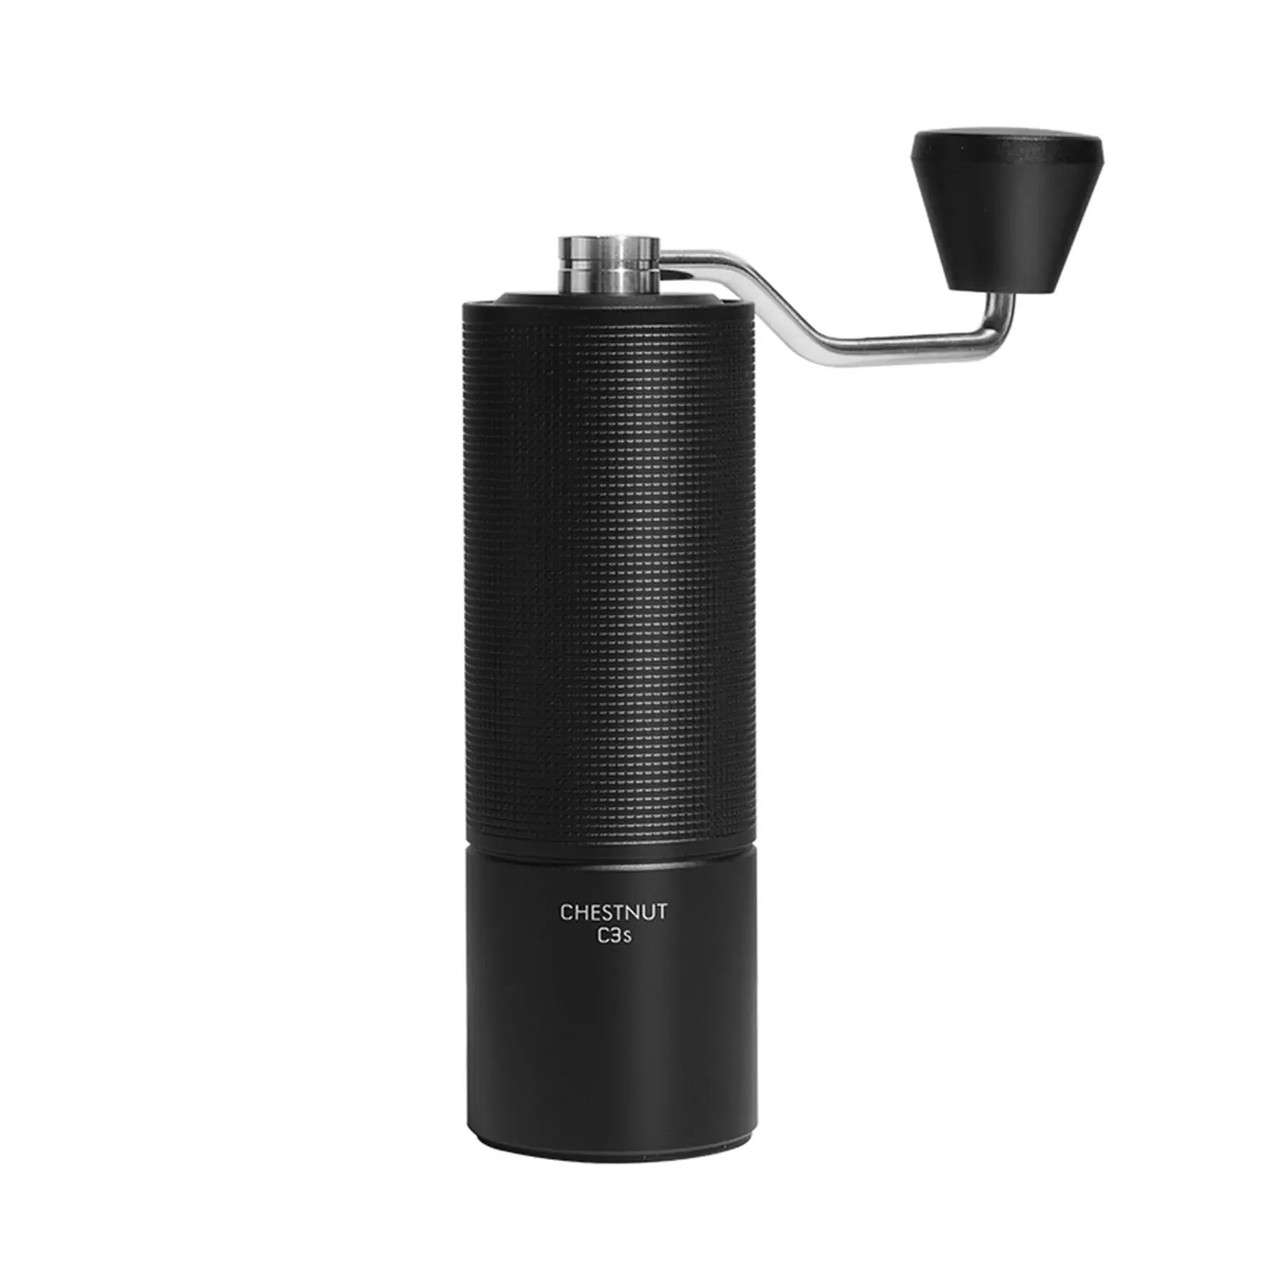 Timemore USA C2 Manual Coffee Grinder for Espresso and Pour-Over